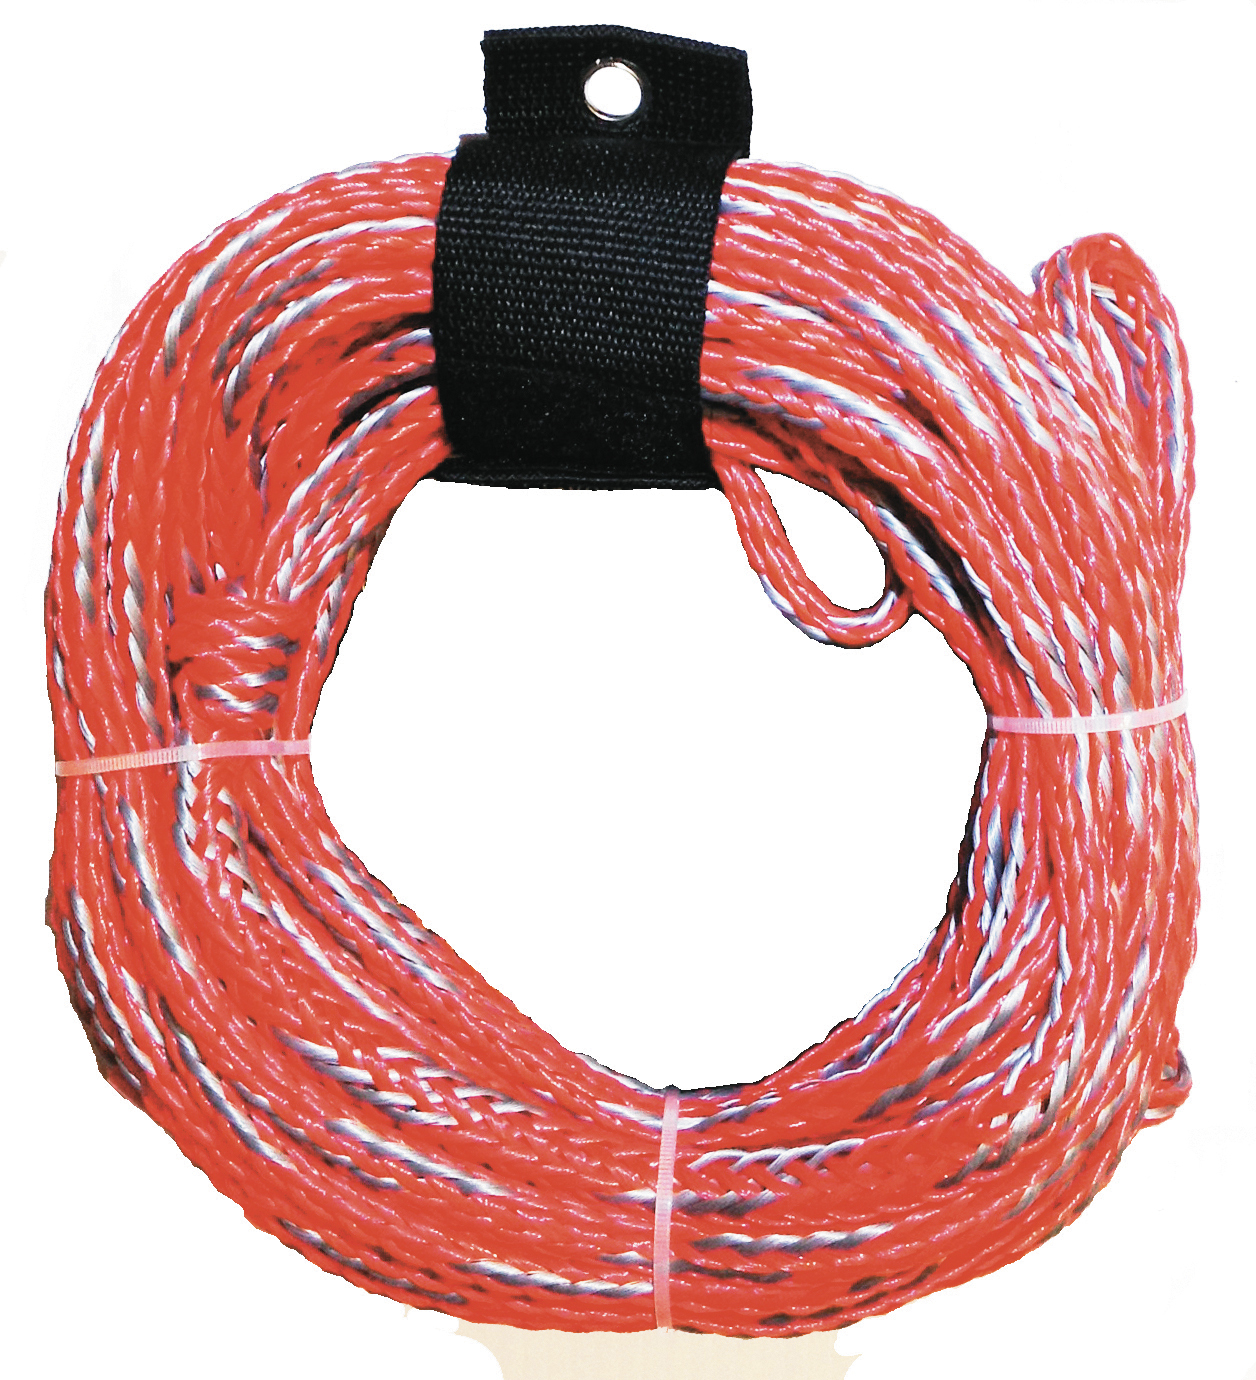 Essential Pro Towables Rope, HD 1-2 Riders Ski Tube Rope